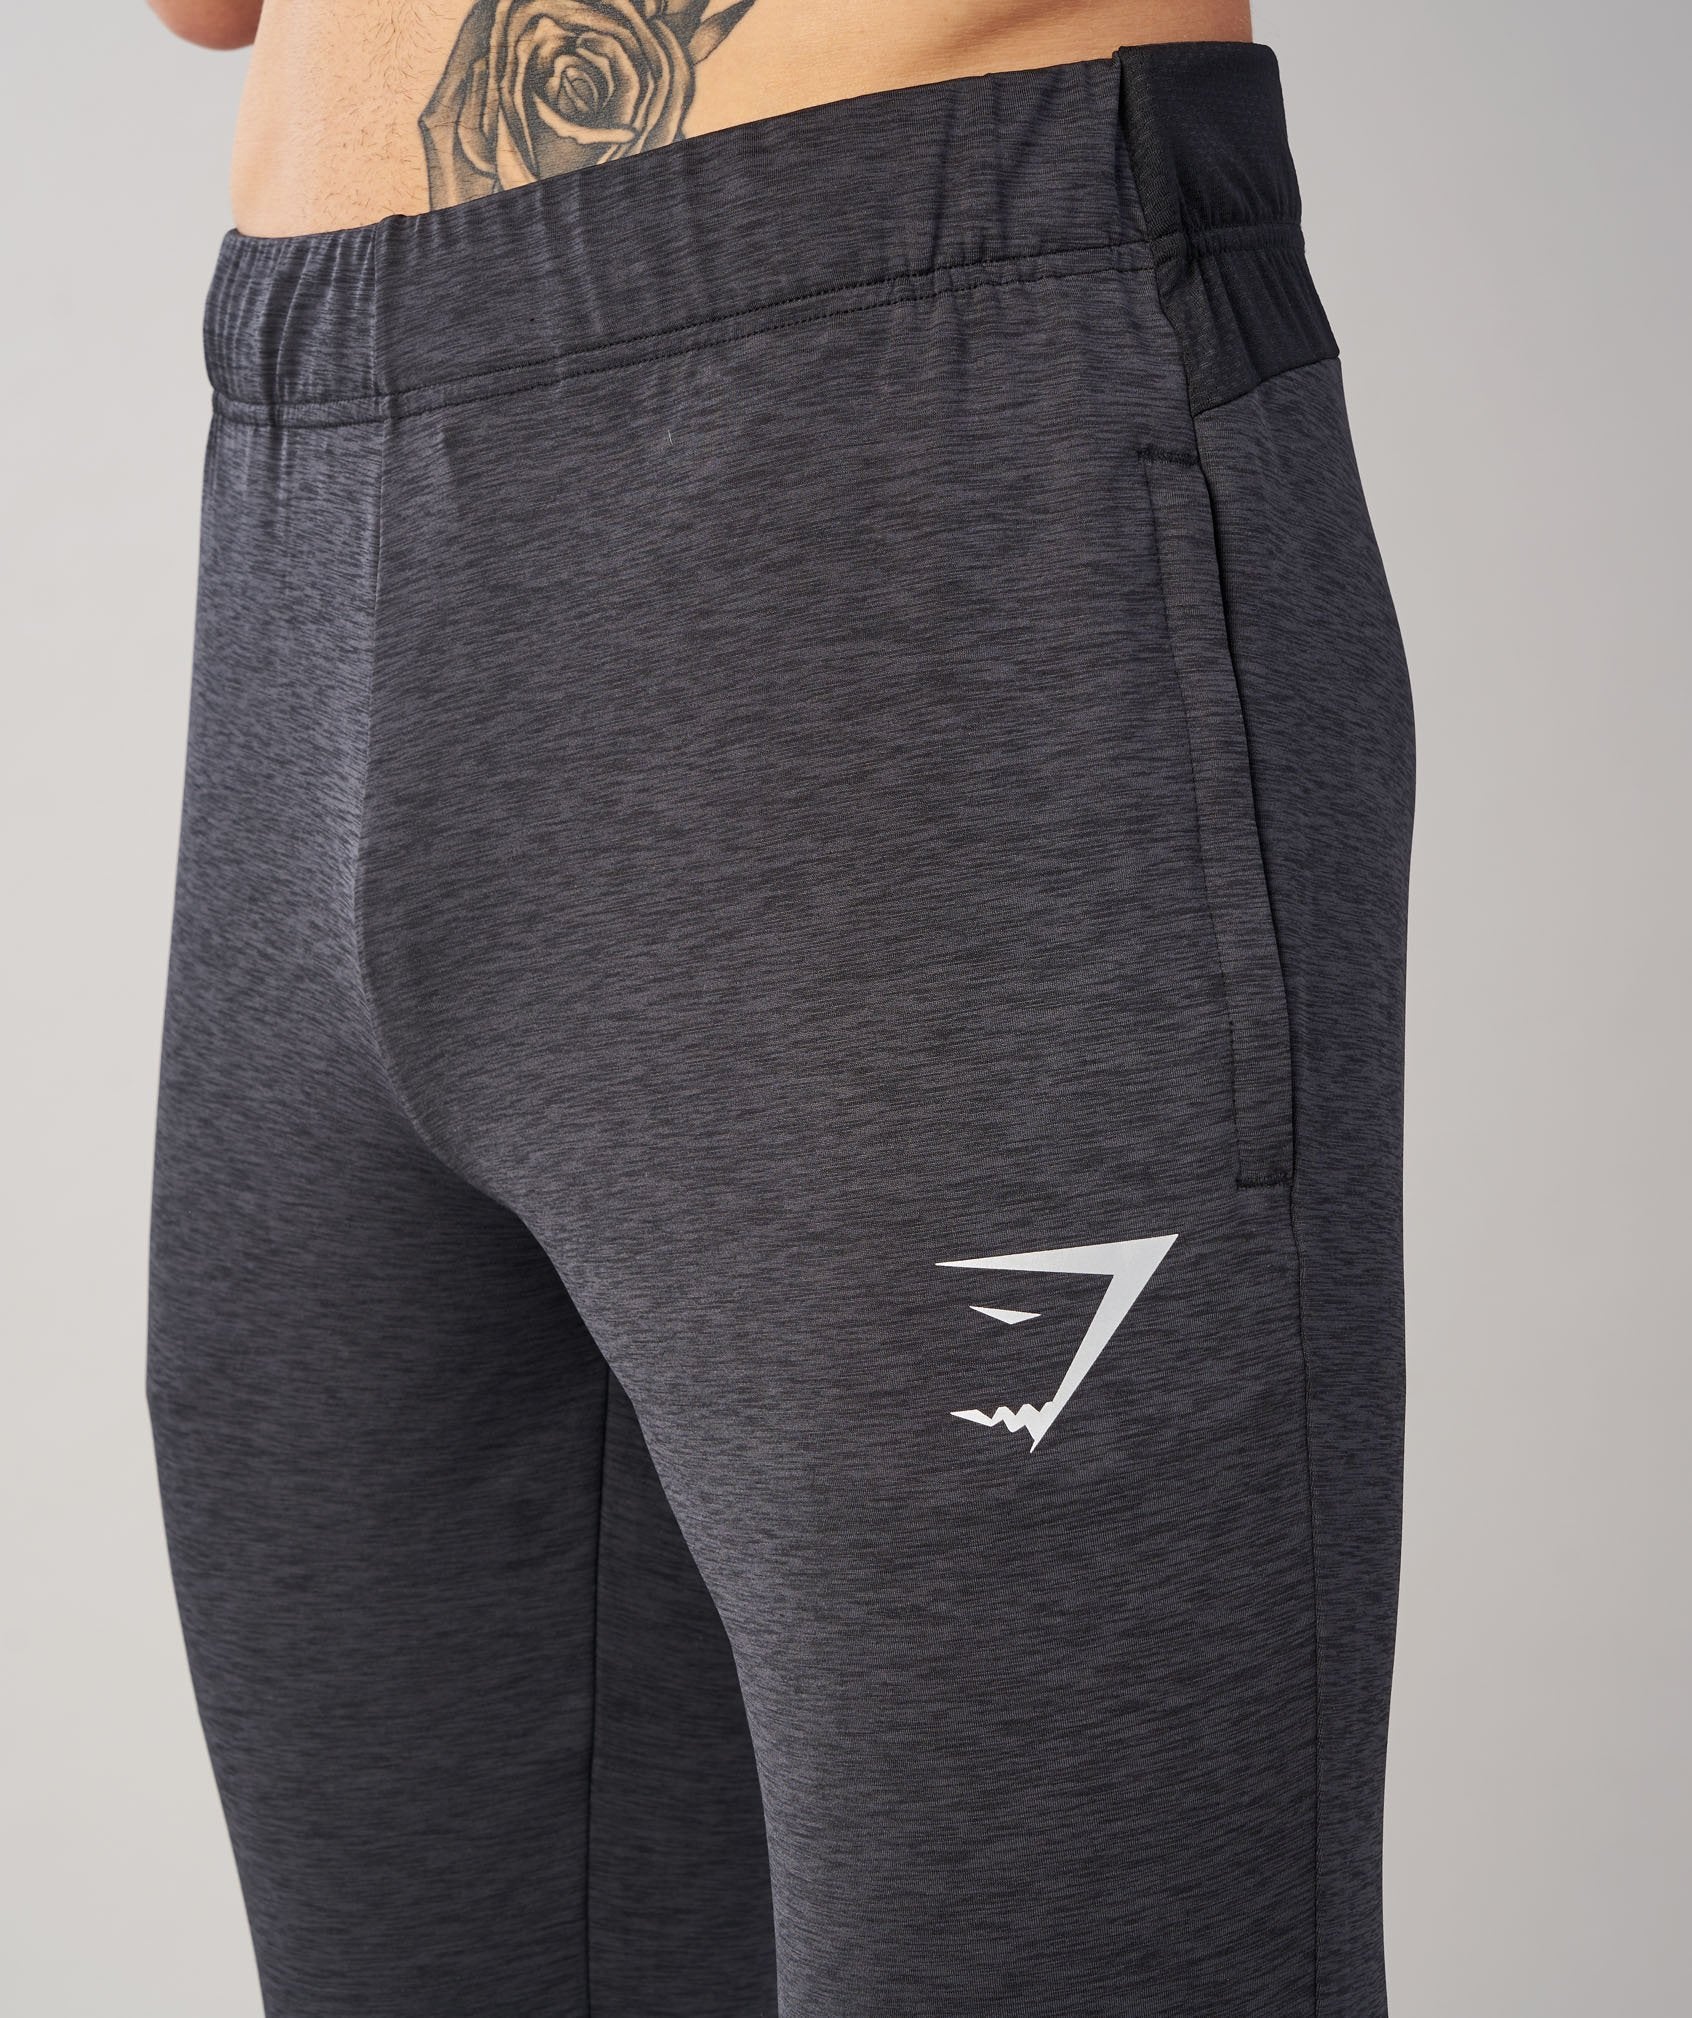 Fallout Bottoms in Black Marl - view 5